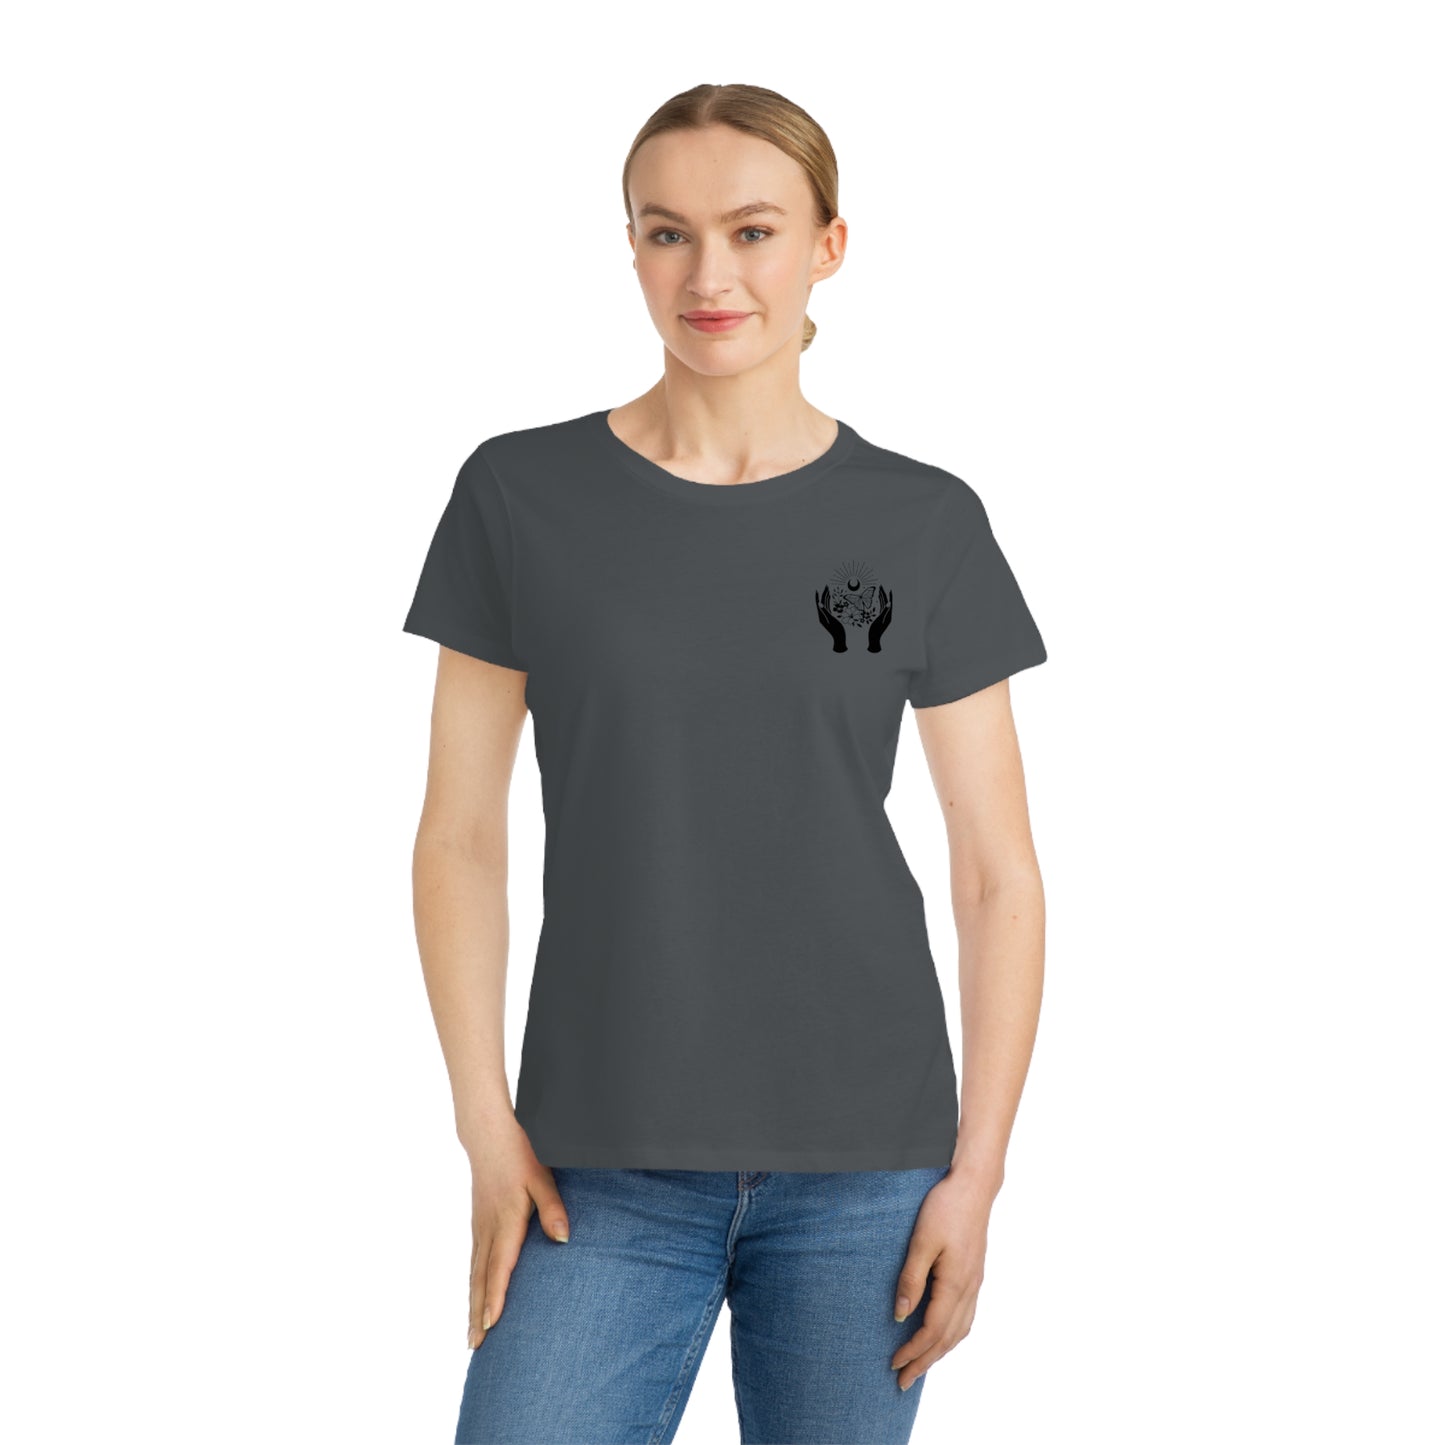 Organic Women's Lifting Others T-Shirt - The Oracle Alchemist